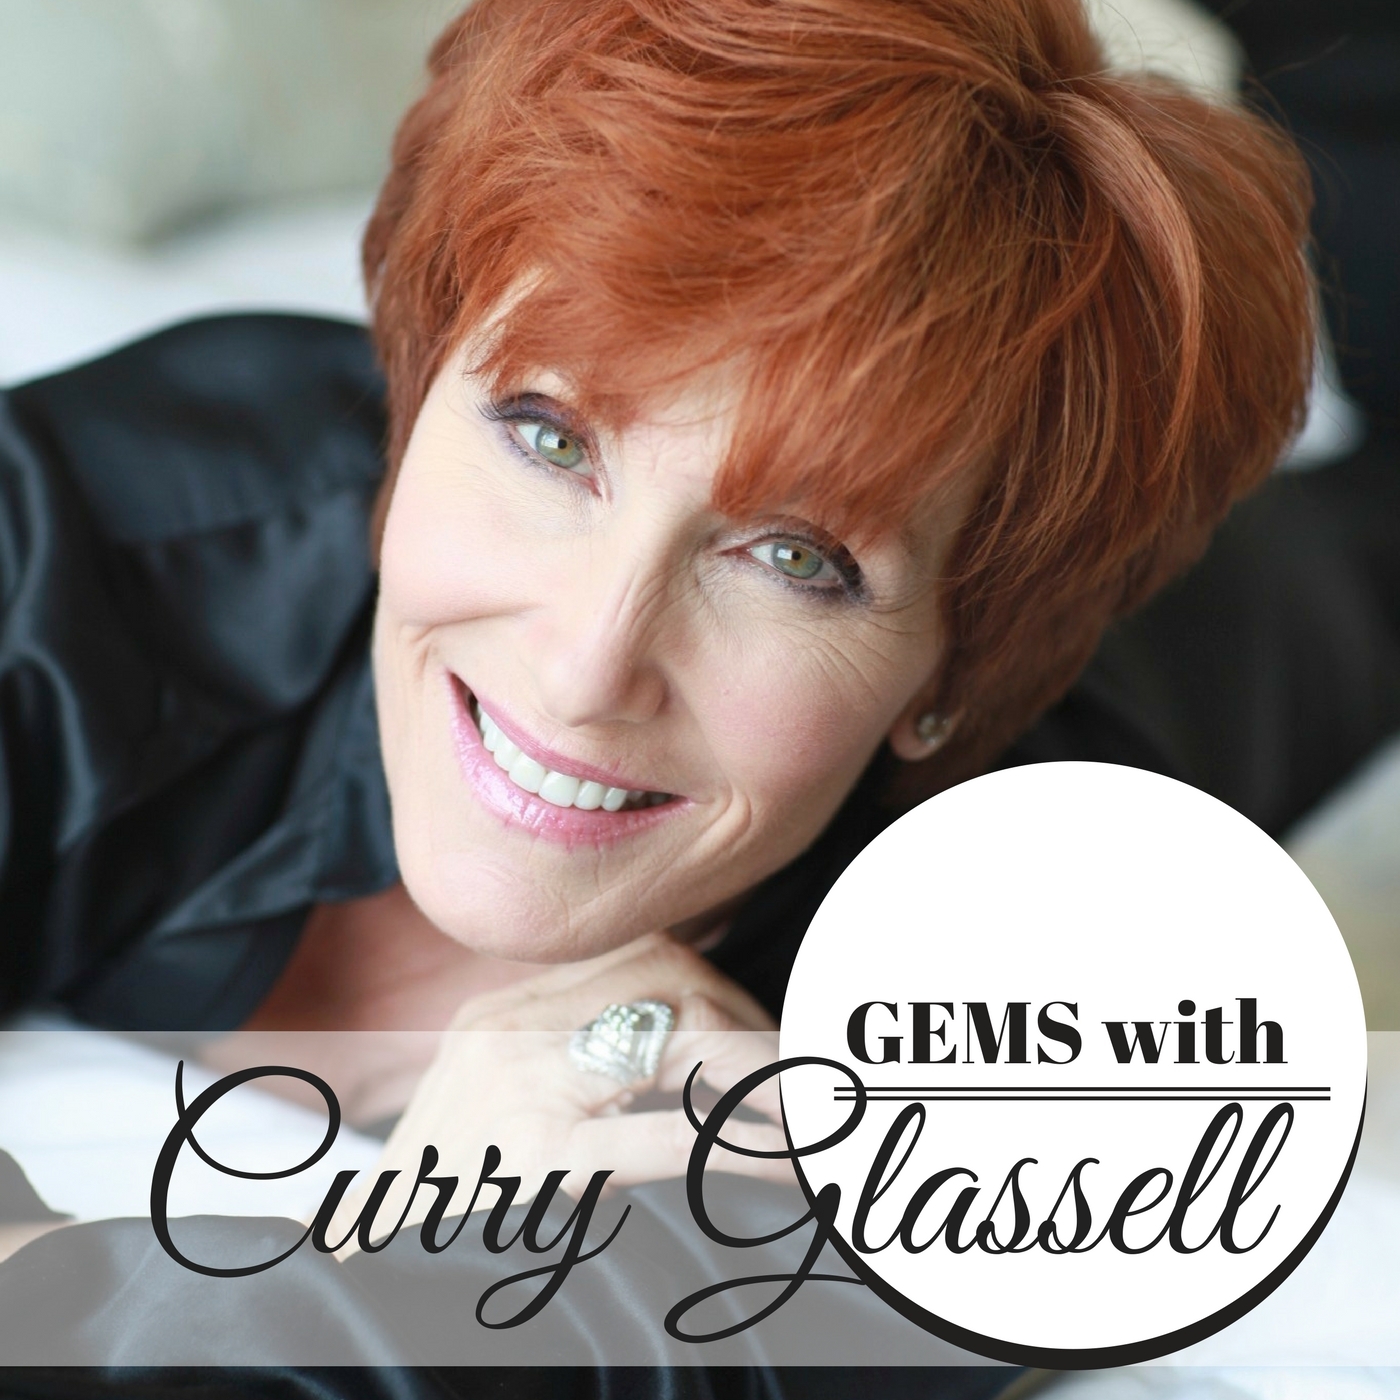 GEMS with Curry Glassell “Having Vs. Spending Money” #1 Show of All Time Podcast #222 